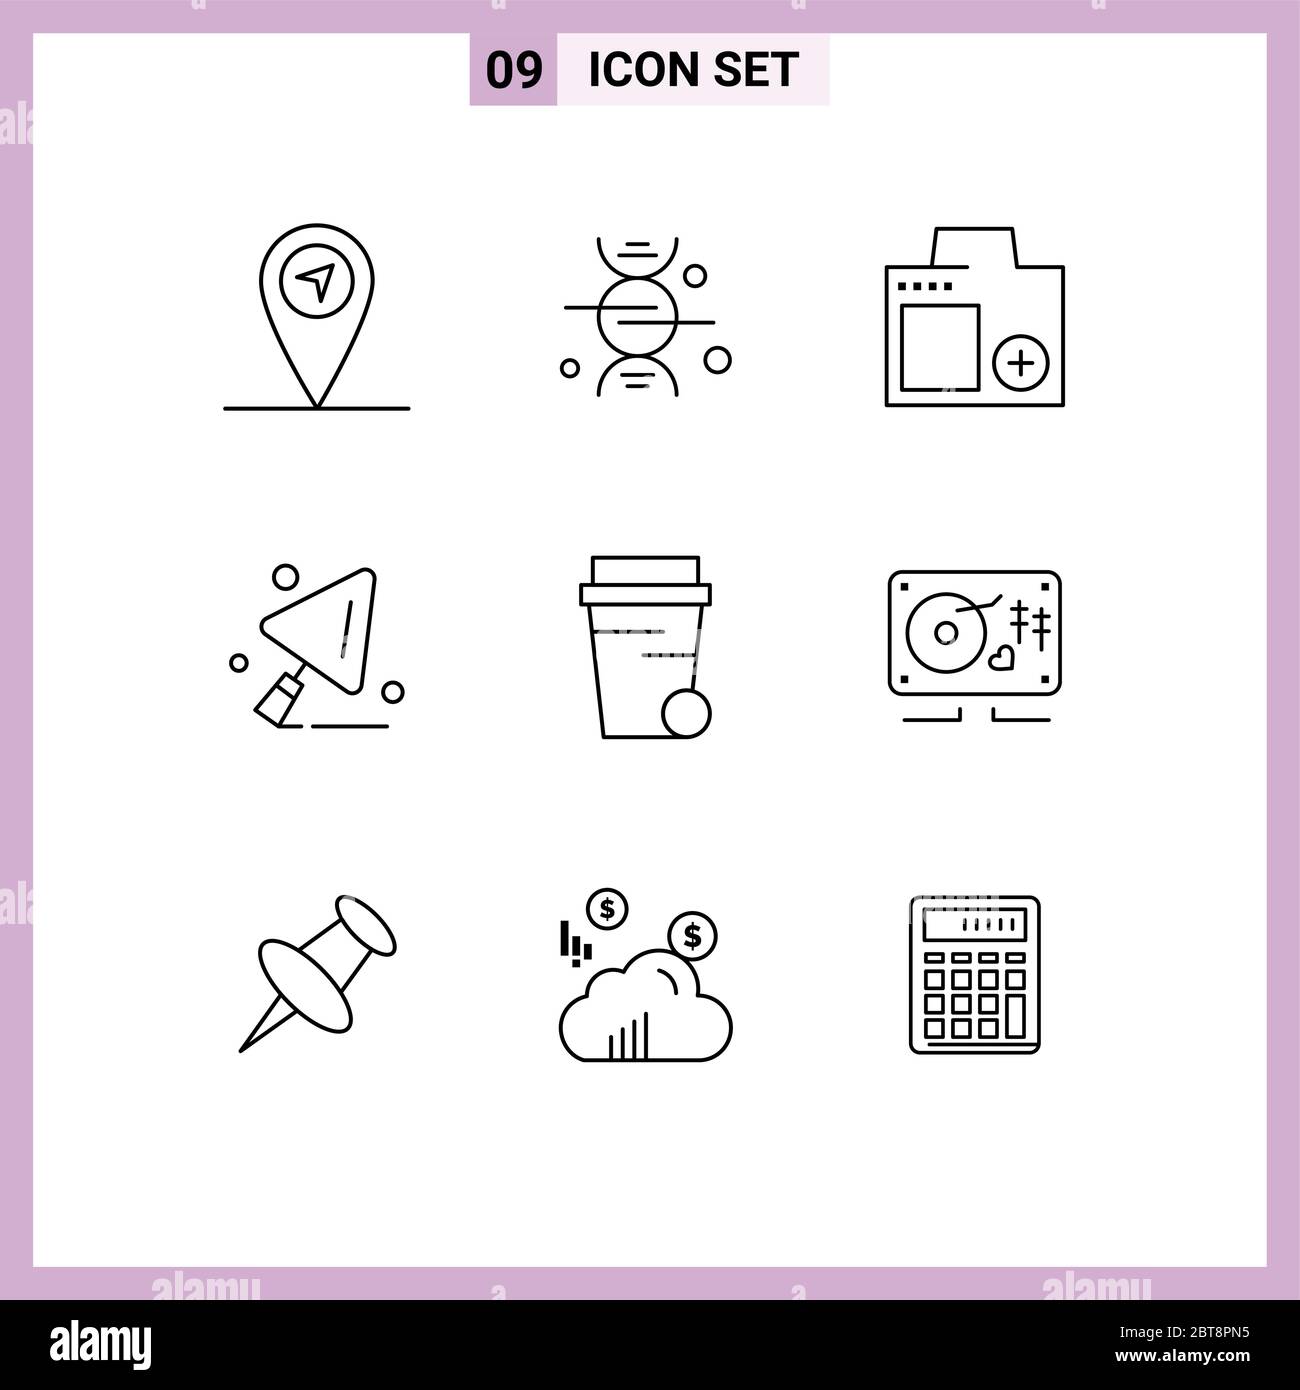 Set of 9 Modern UI Icons Symbols Signs for music, soup, digital, glass, construction tools Editable Vector Design Elements Stock Vector